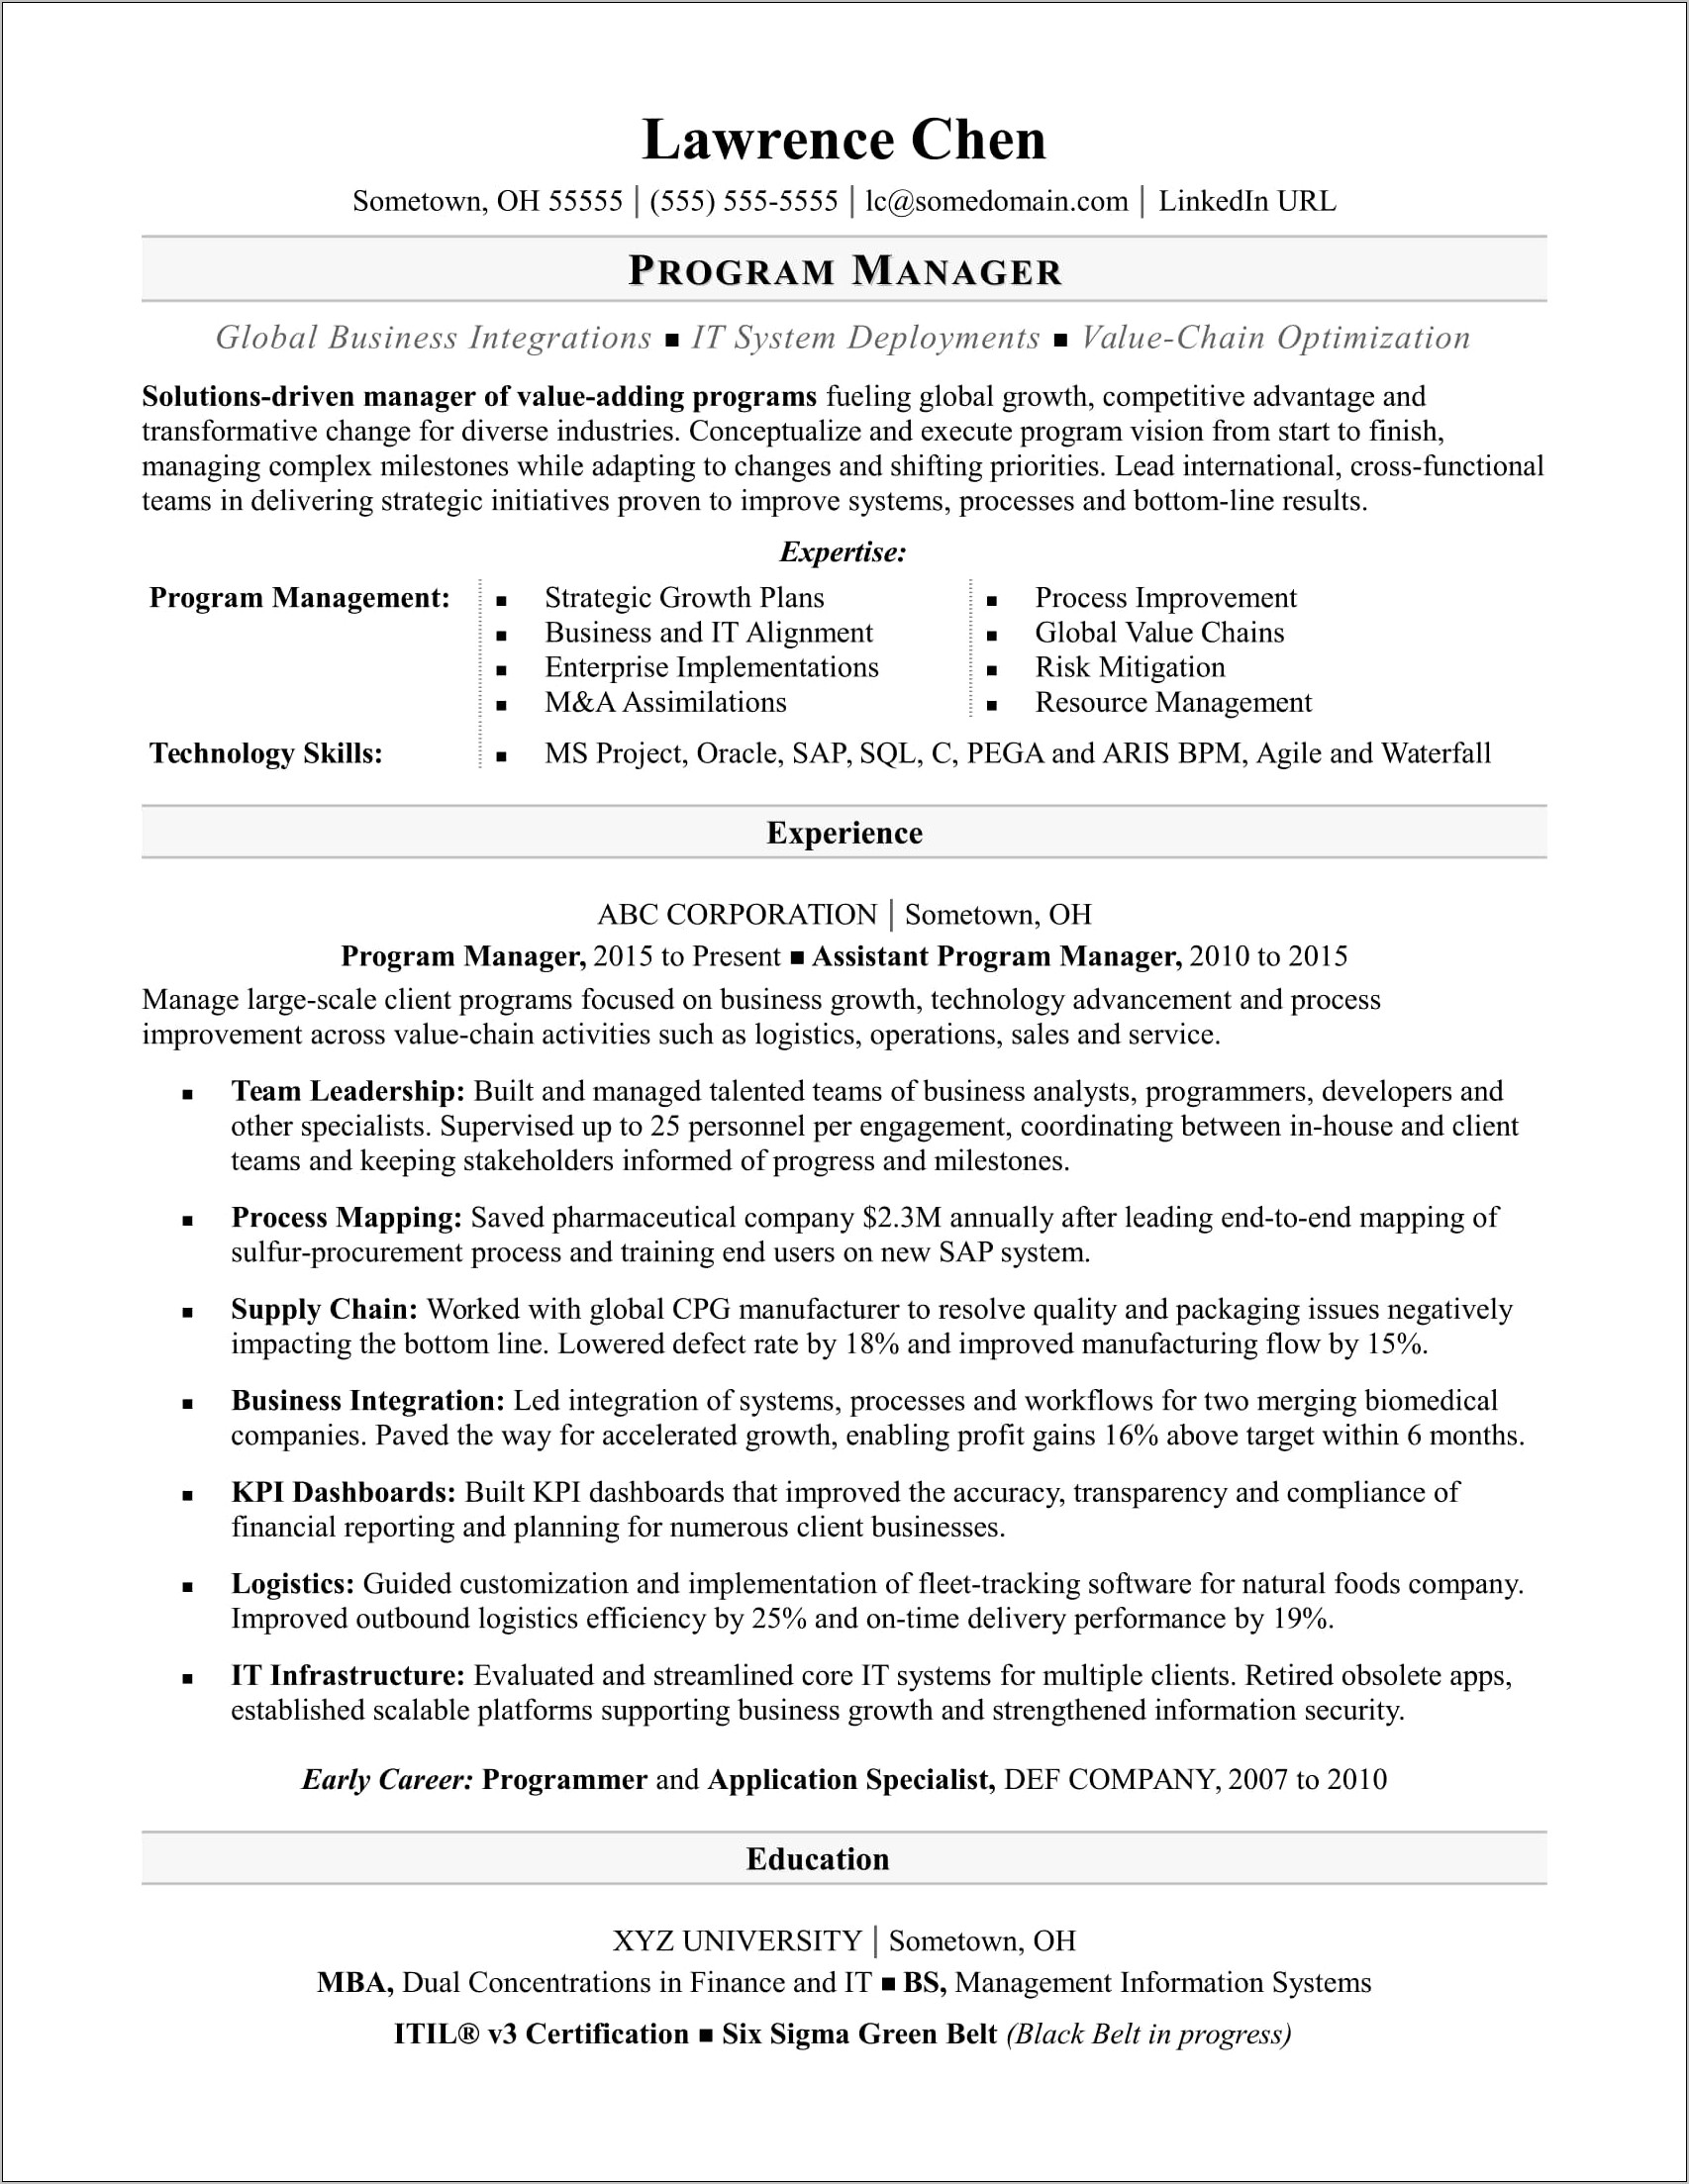 Resume Executive Summary Project Manager